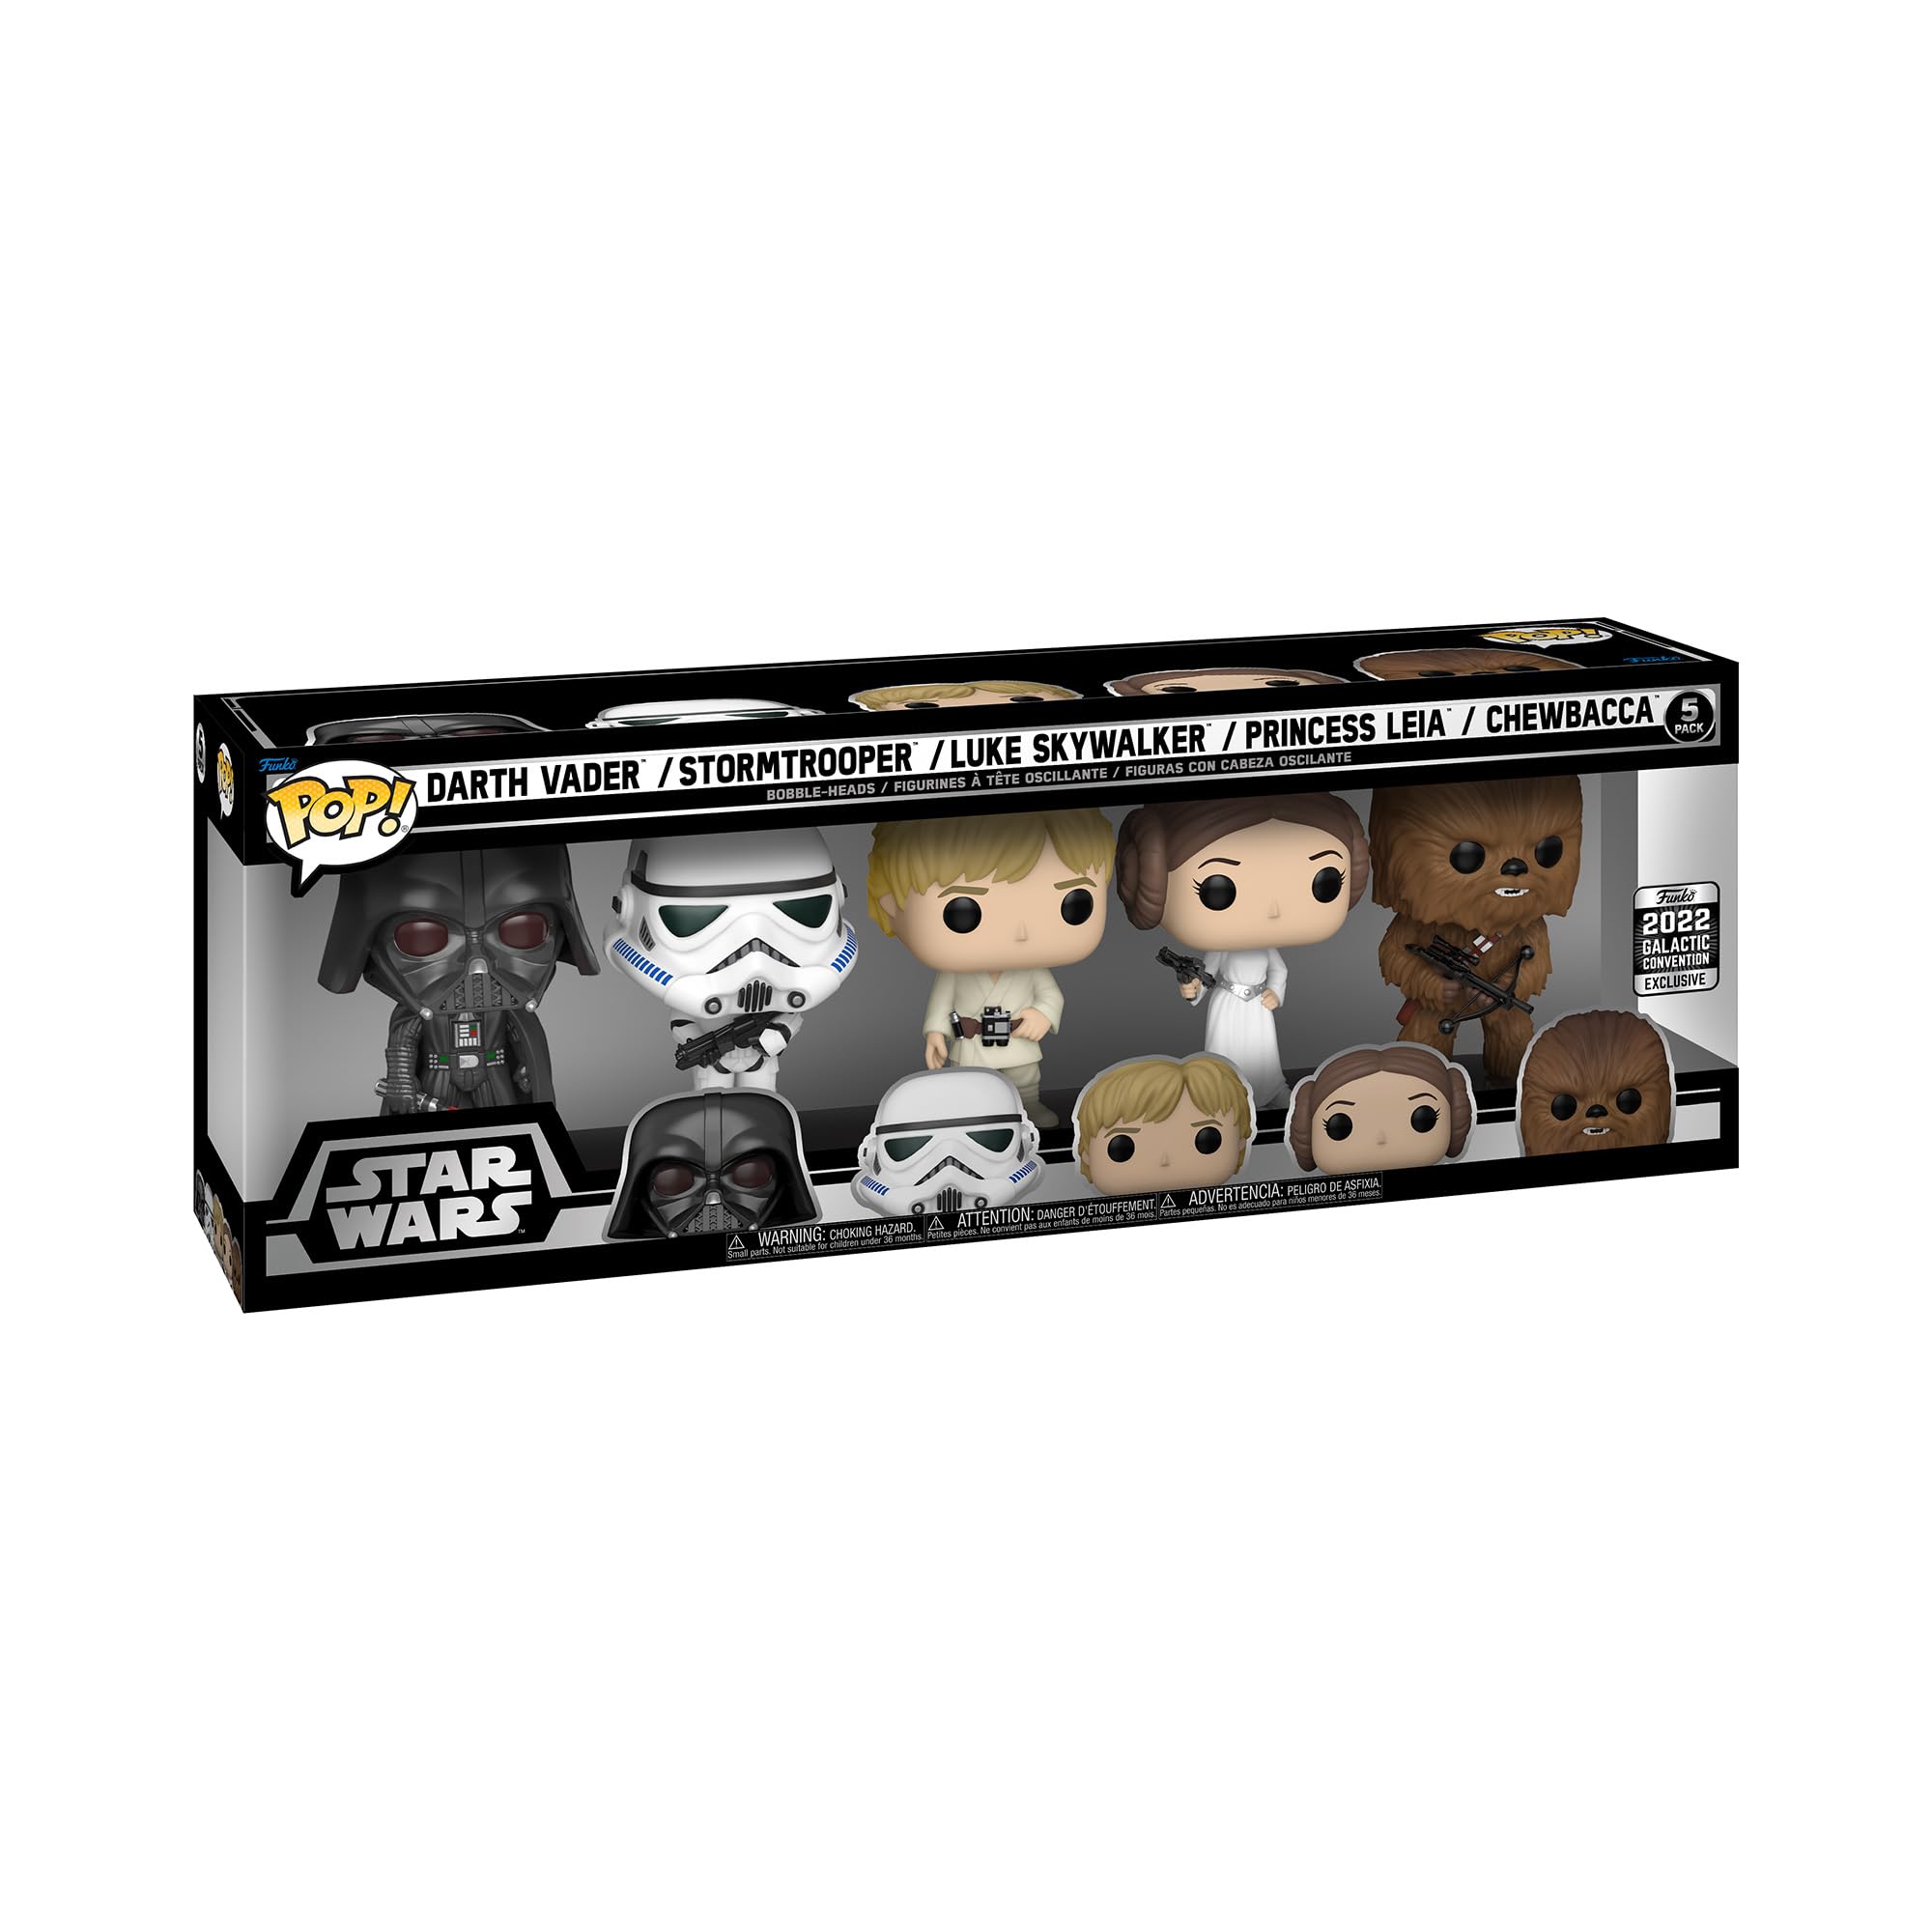 Funko Pop! Vinyl: Star Wars - Darth Vader, Stormtrooper, Luke Skywalker, Princess Leia and Chewbacca - 5 Pack (Shared Galactic Convention, Amazon Exclusive), Multicolor, 64122